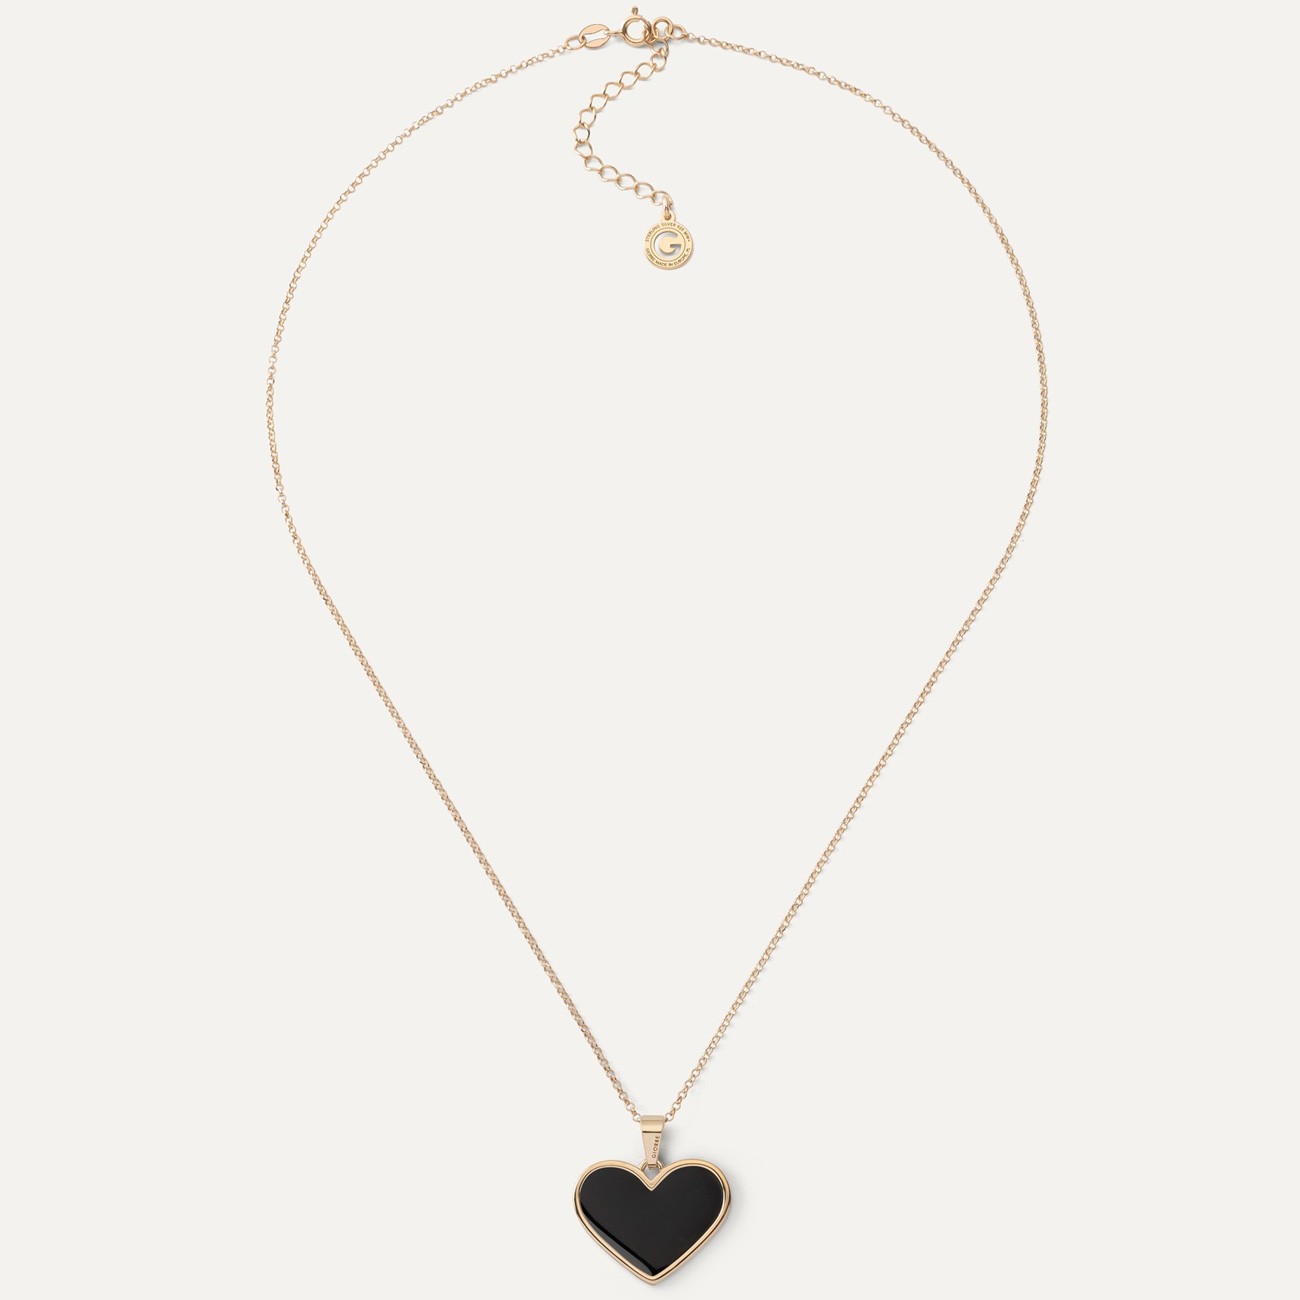 Black resin heart necklace, sterling silver 925